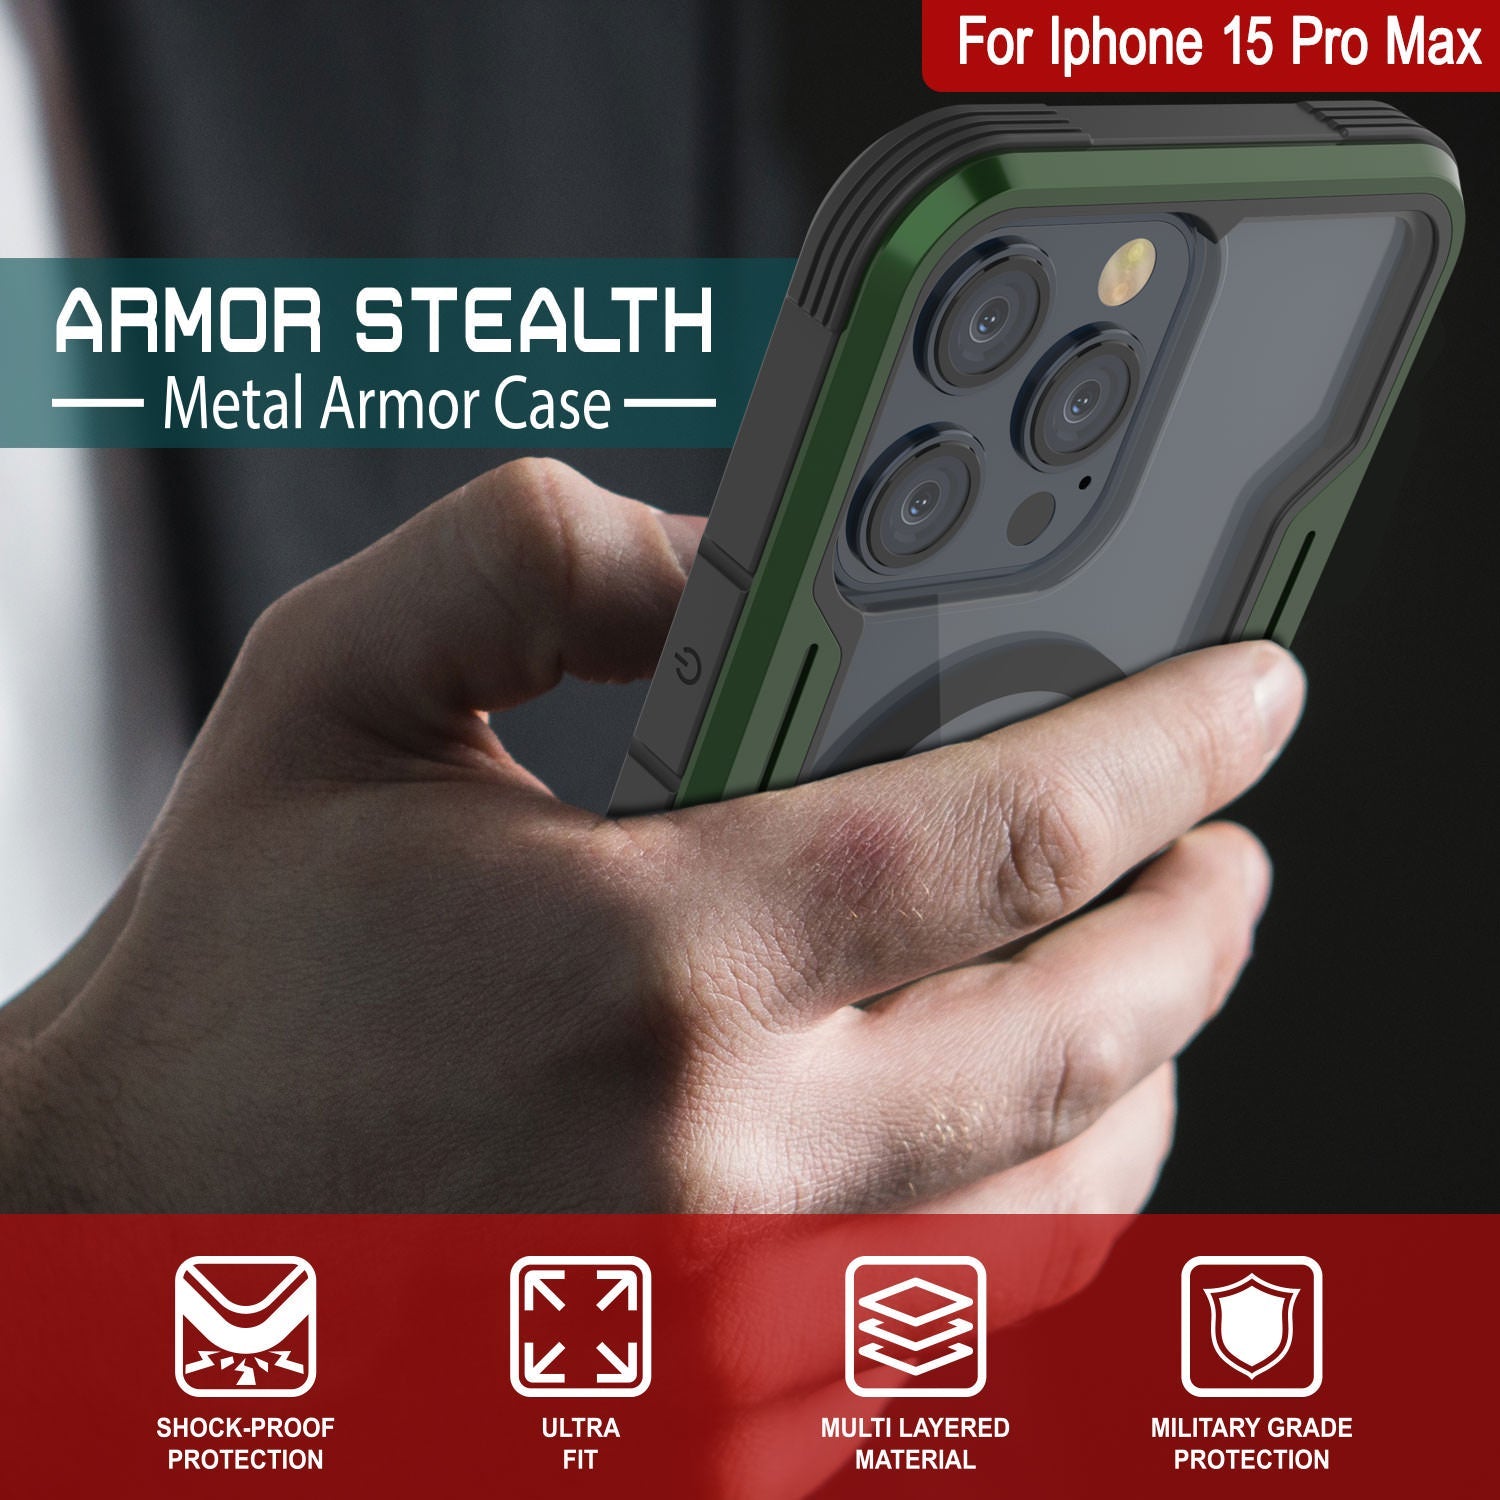 Punkcase iPhone 15 Pro Max Armor Stealth MAG Defense Case Protective Military Grade Multilayer Cover [Dark Green]